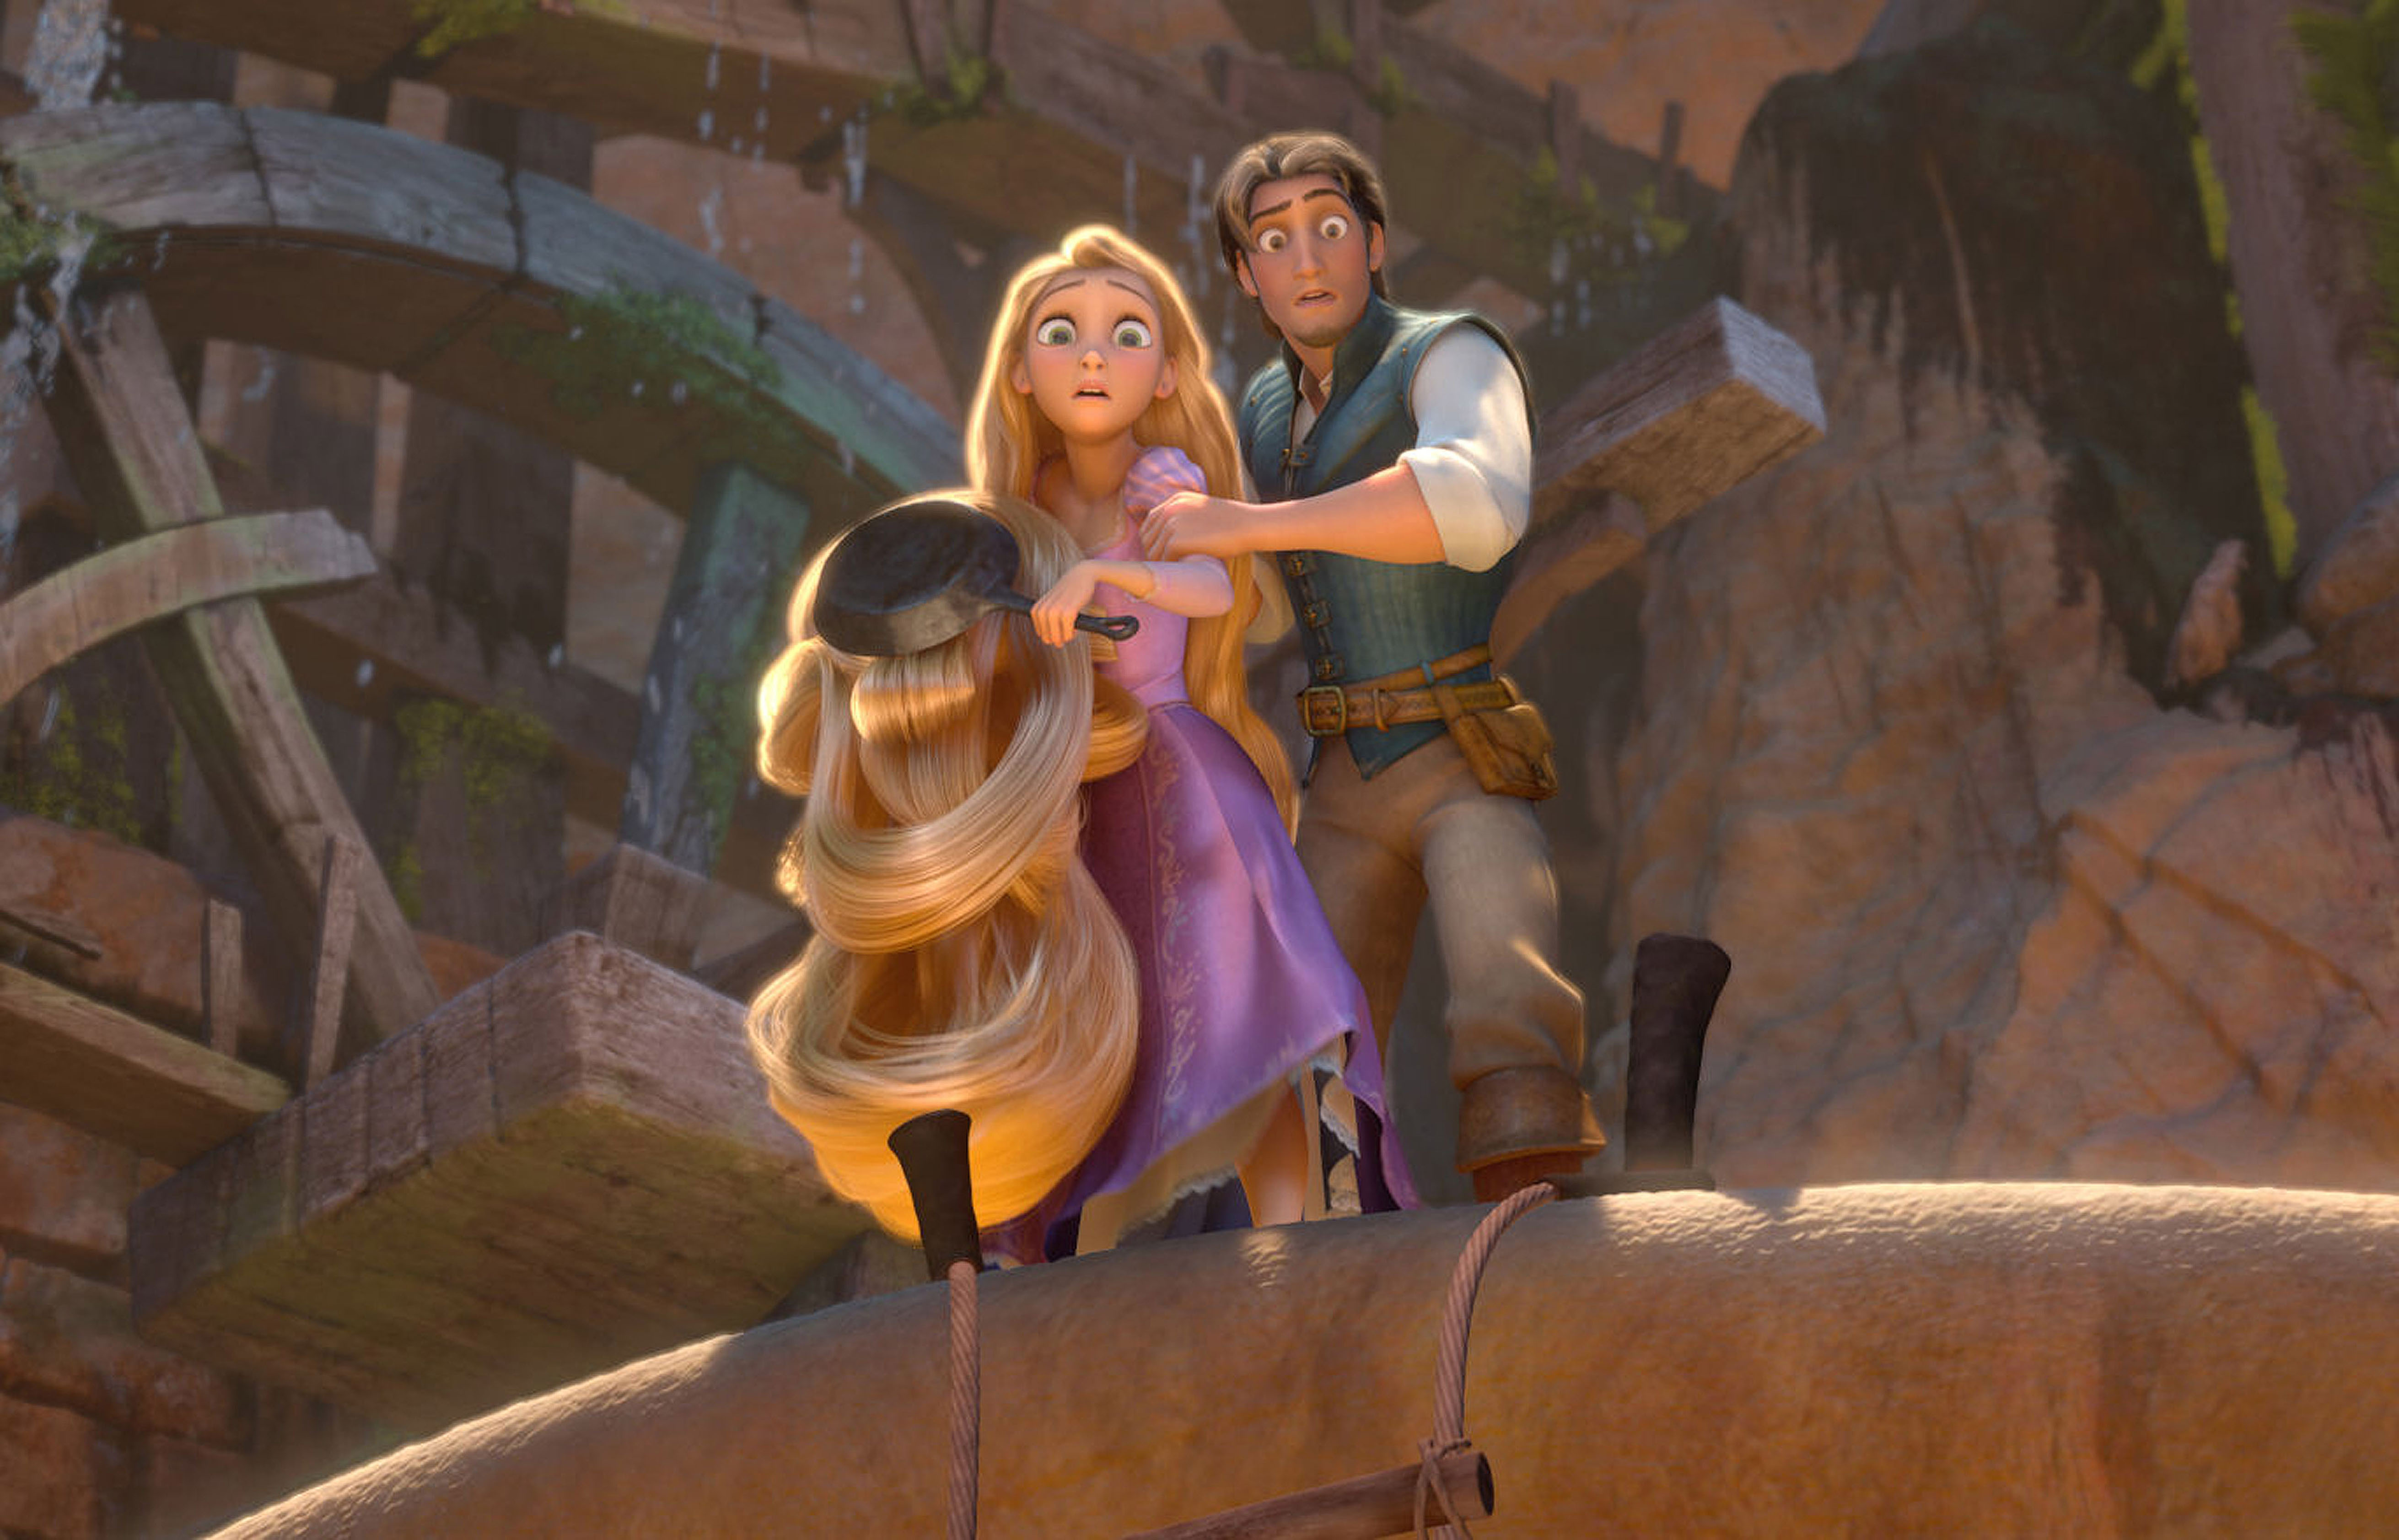 Who Will Play Rapunzel, Flynn Rider in Live-Action 'Tangled'?